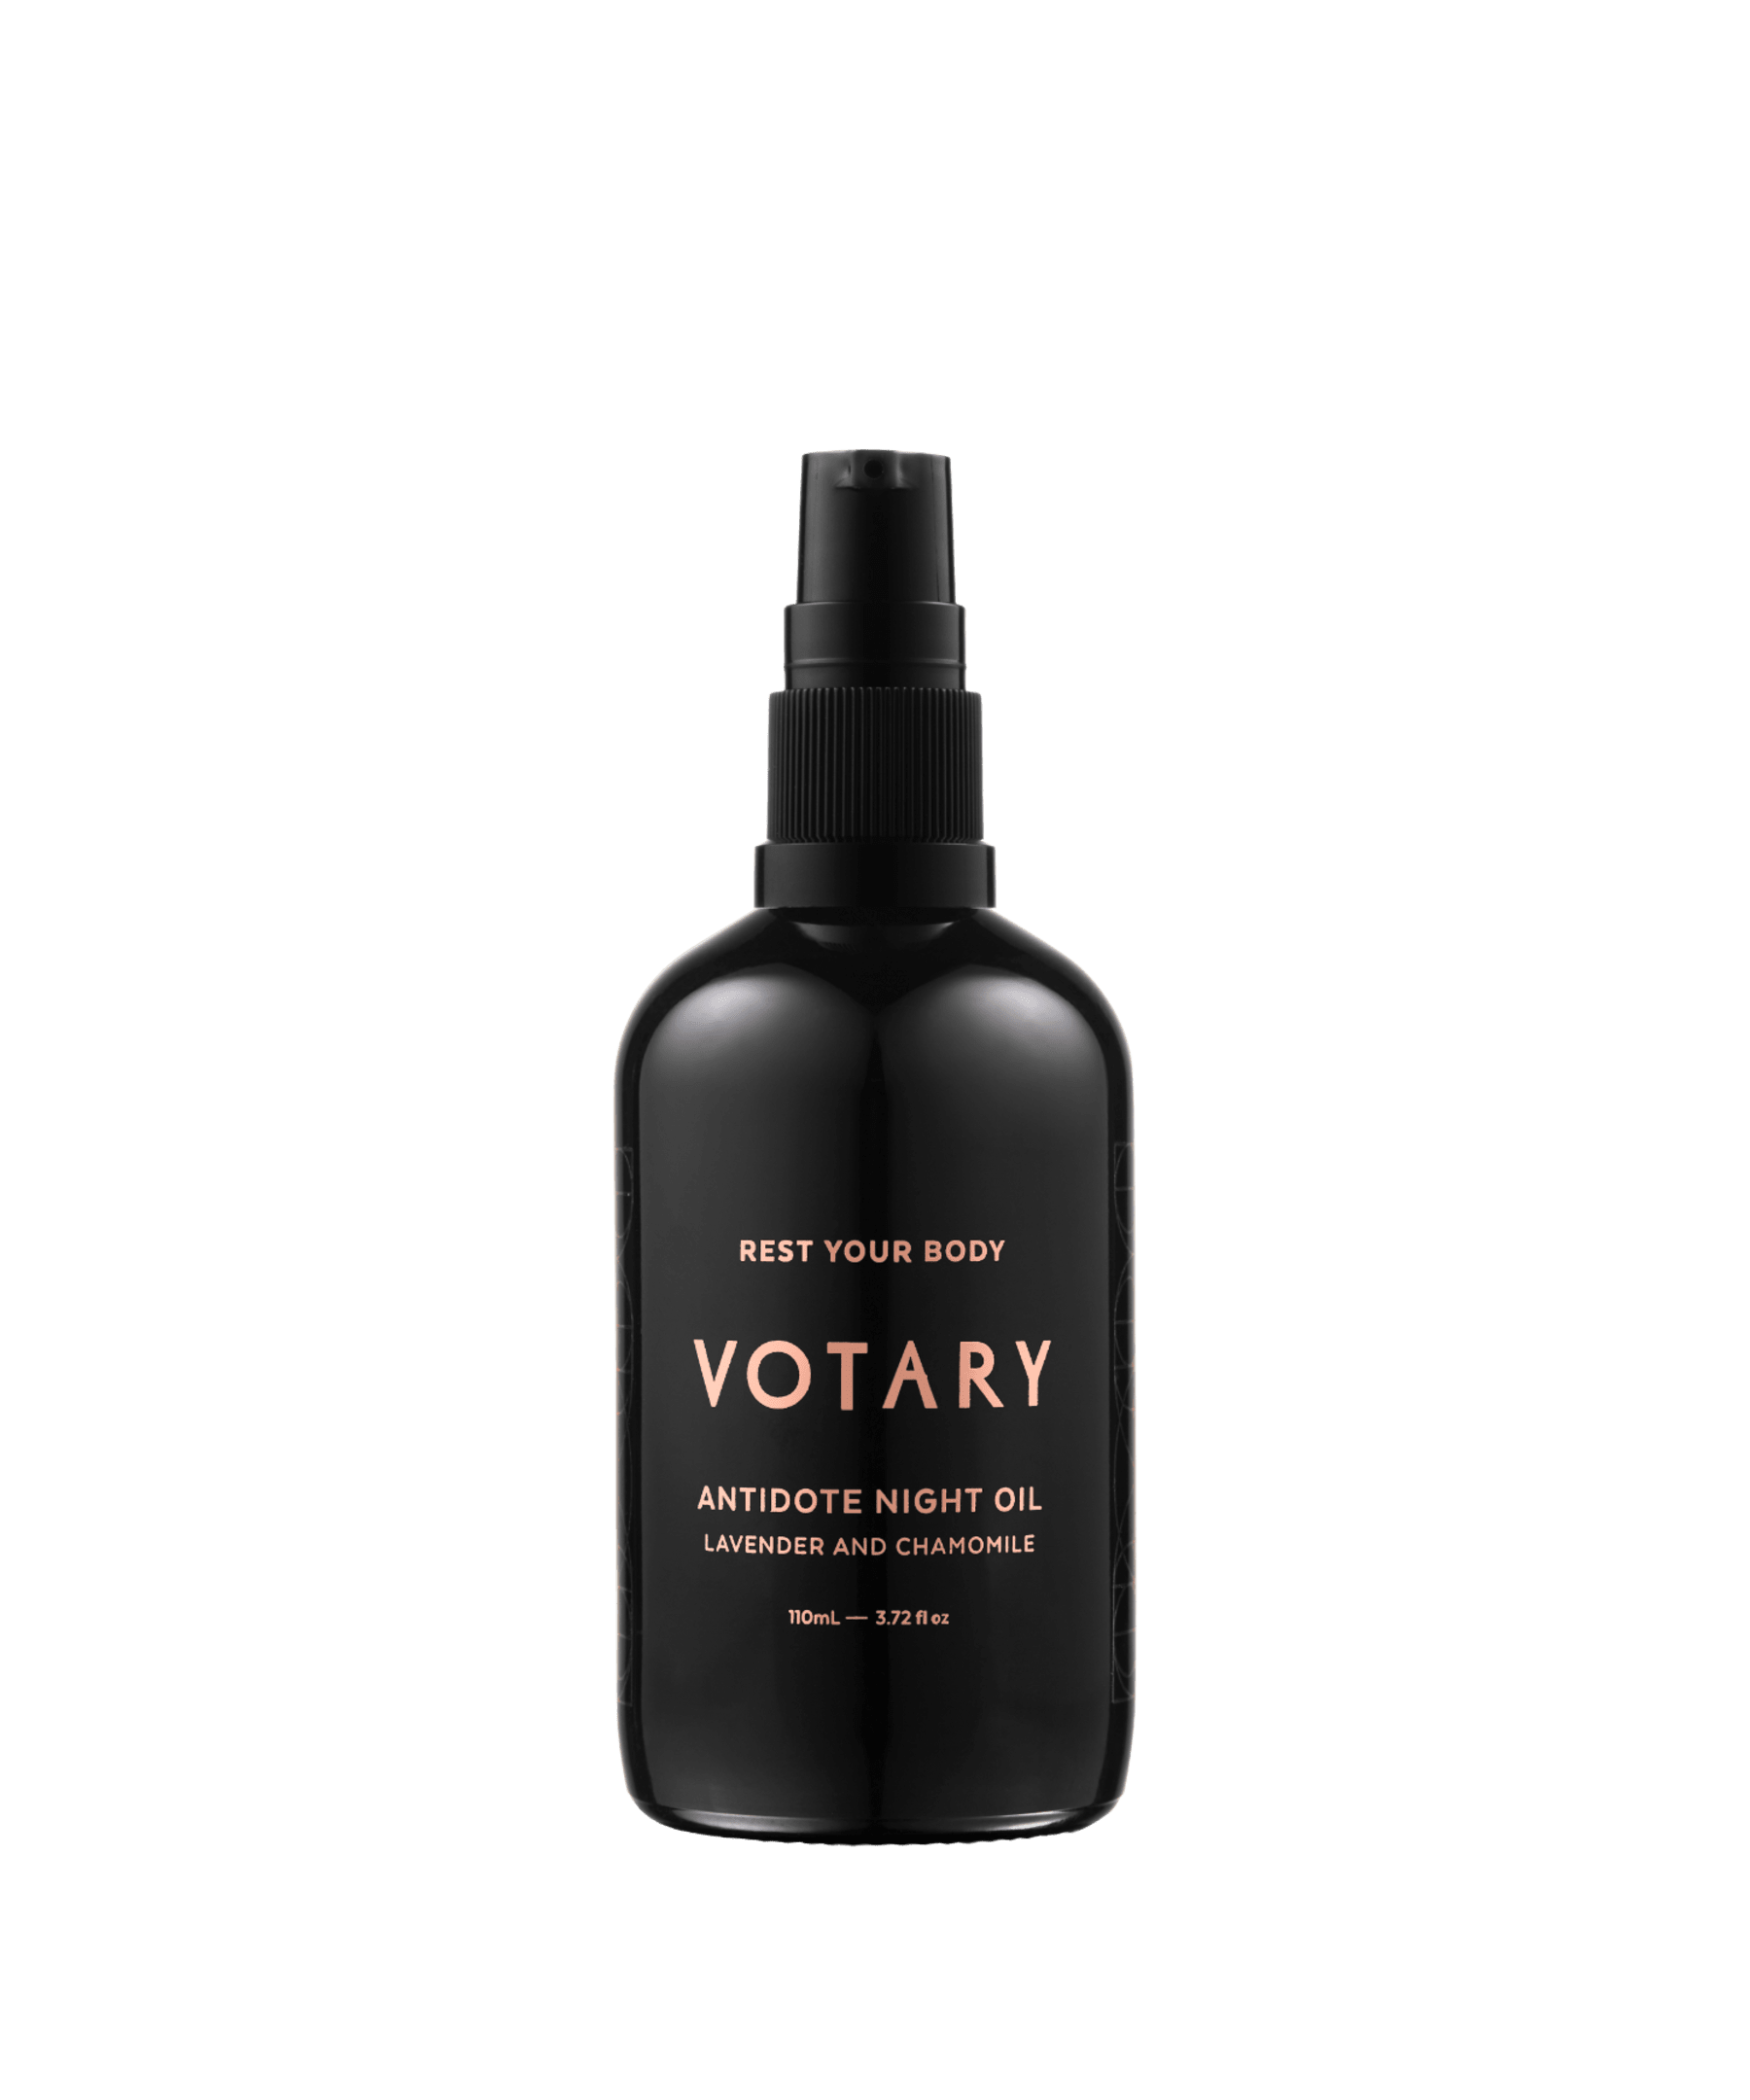 VOTARY Antidote Night Oil Lavender and Chamomile 110 ml